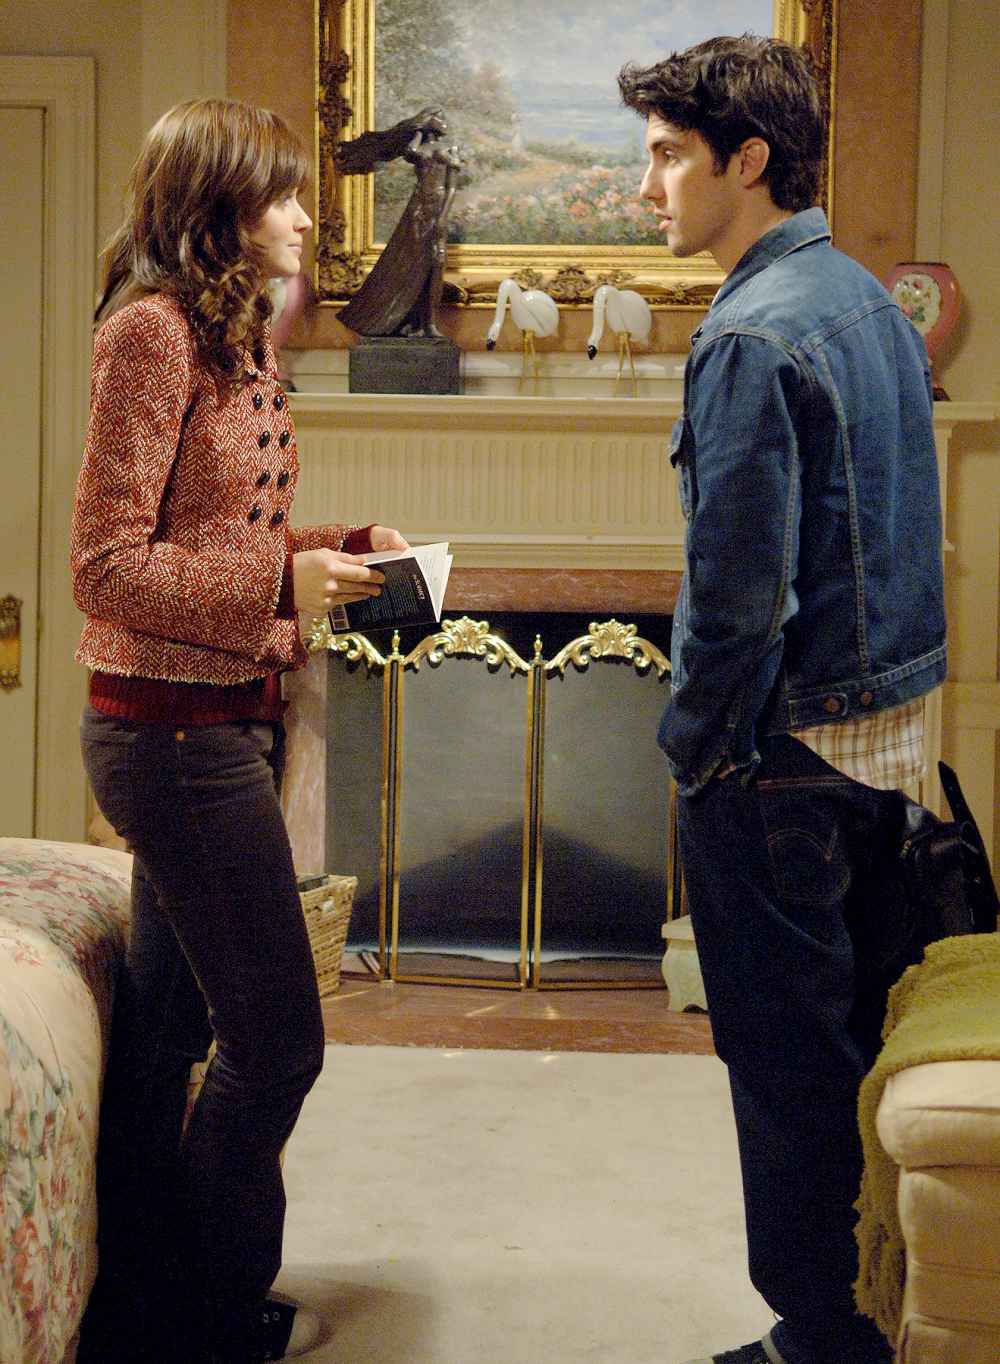 Alexis Bledel as Rory Gilmore and Milo Ventimiglia as Jess on Gilmore Girls.